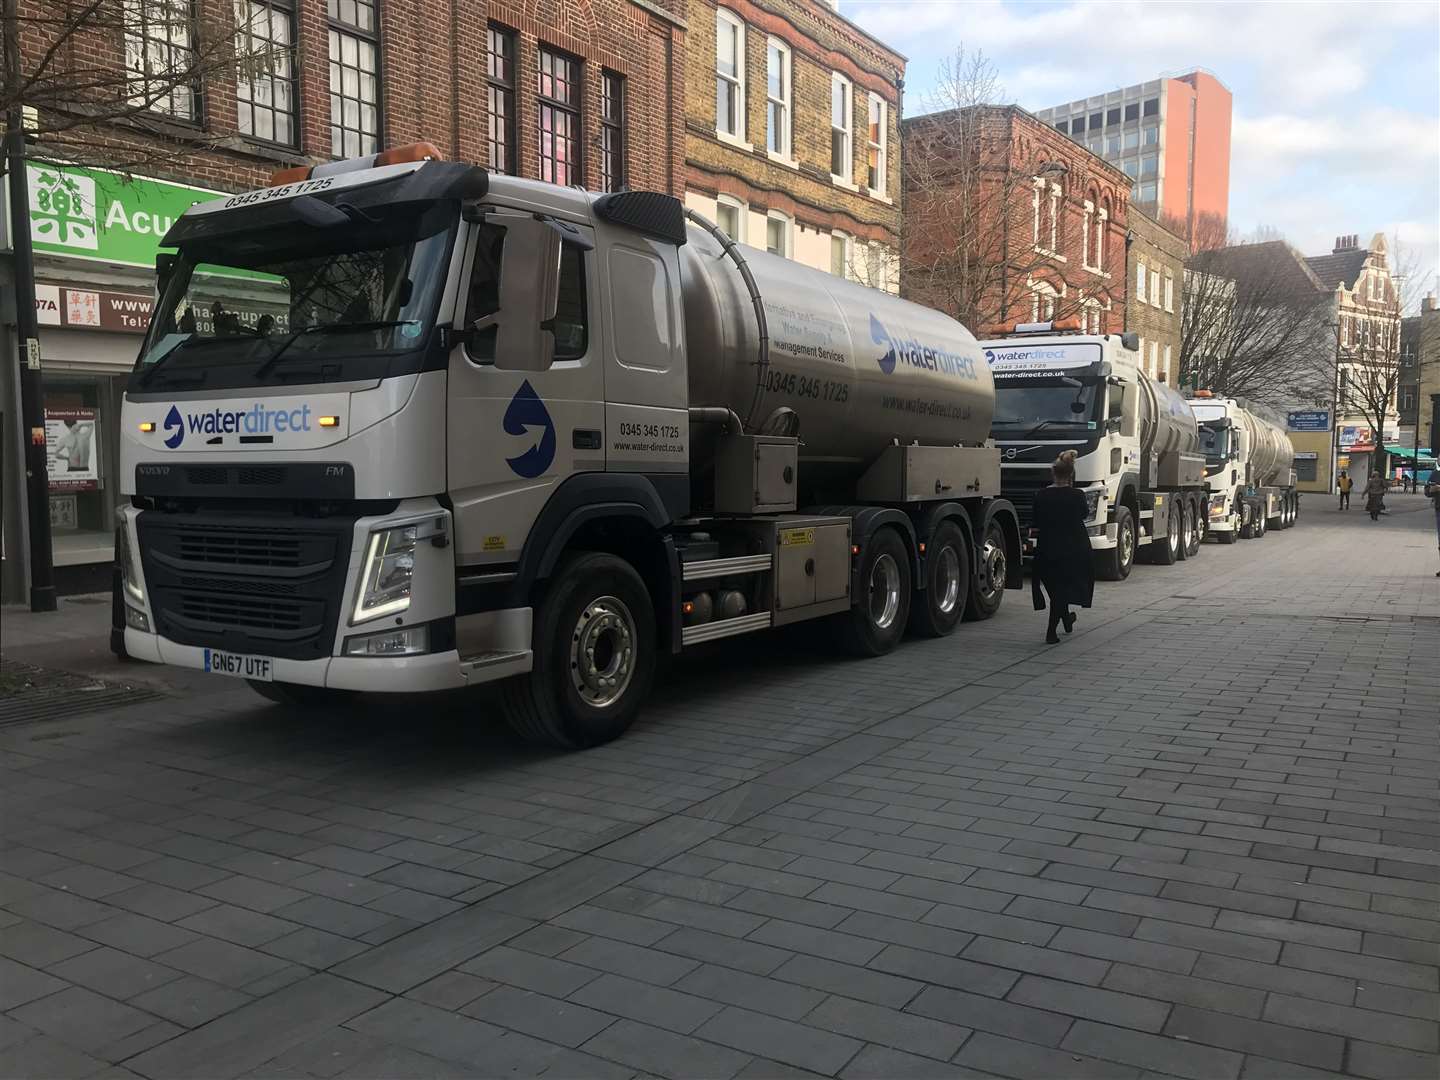 Water bowser lorries in Rochester